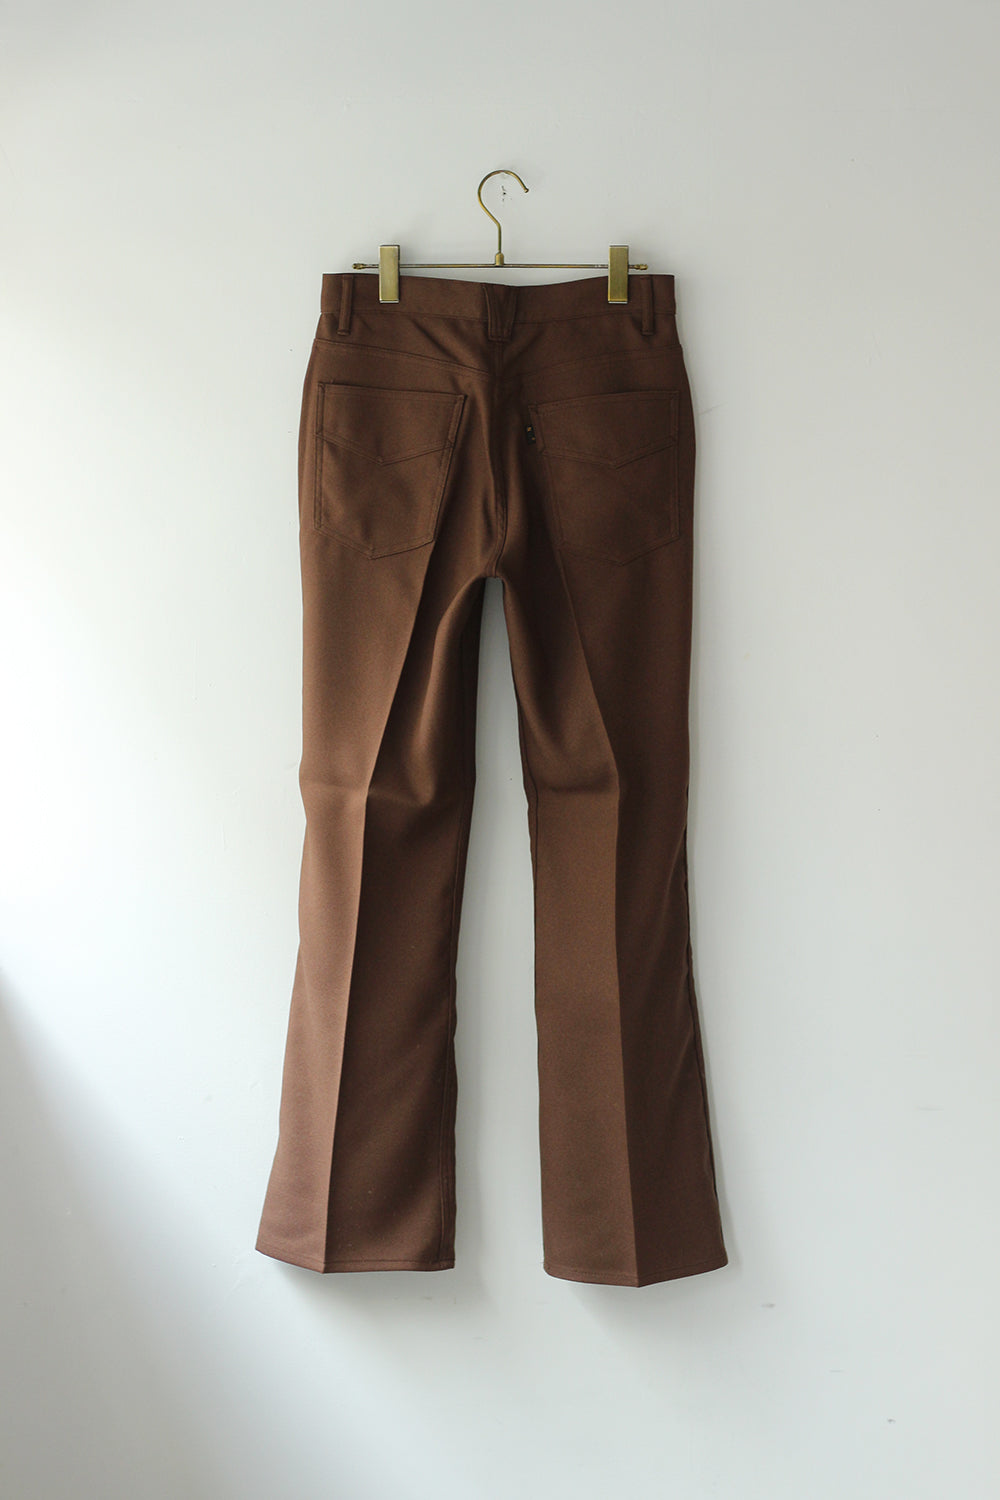 Needles "Boot-Cut Jean - Poly Twill" (brown)